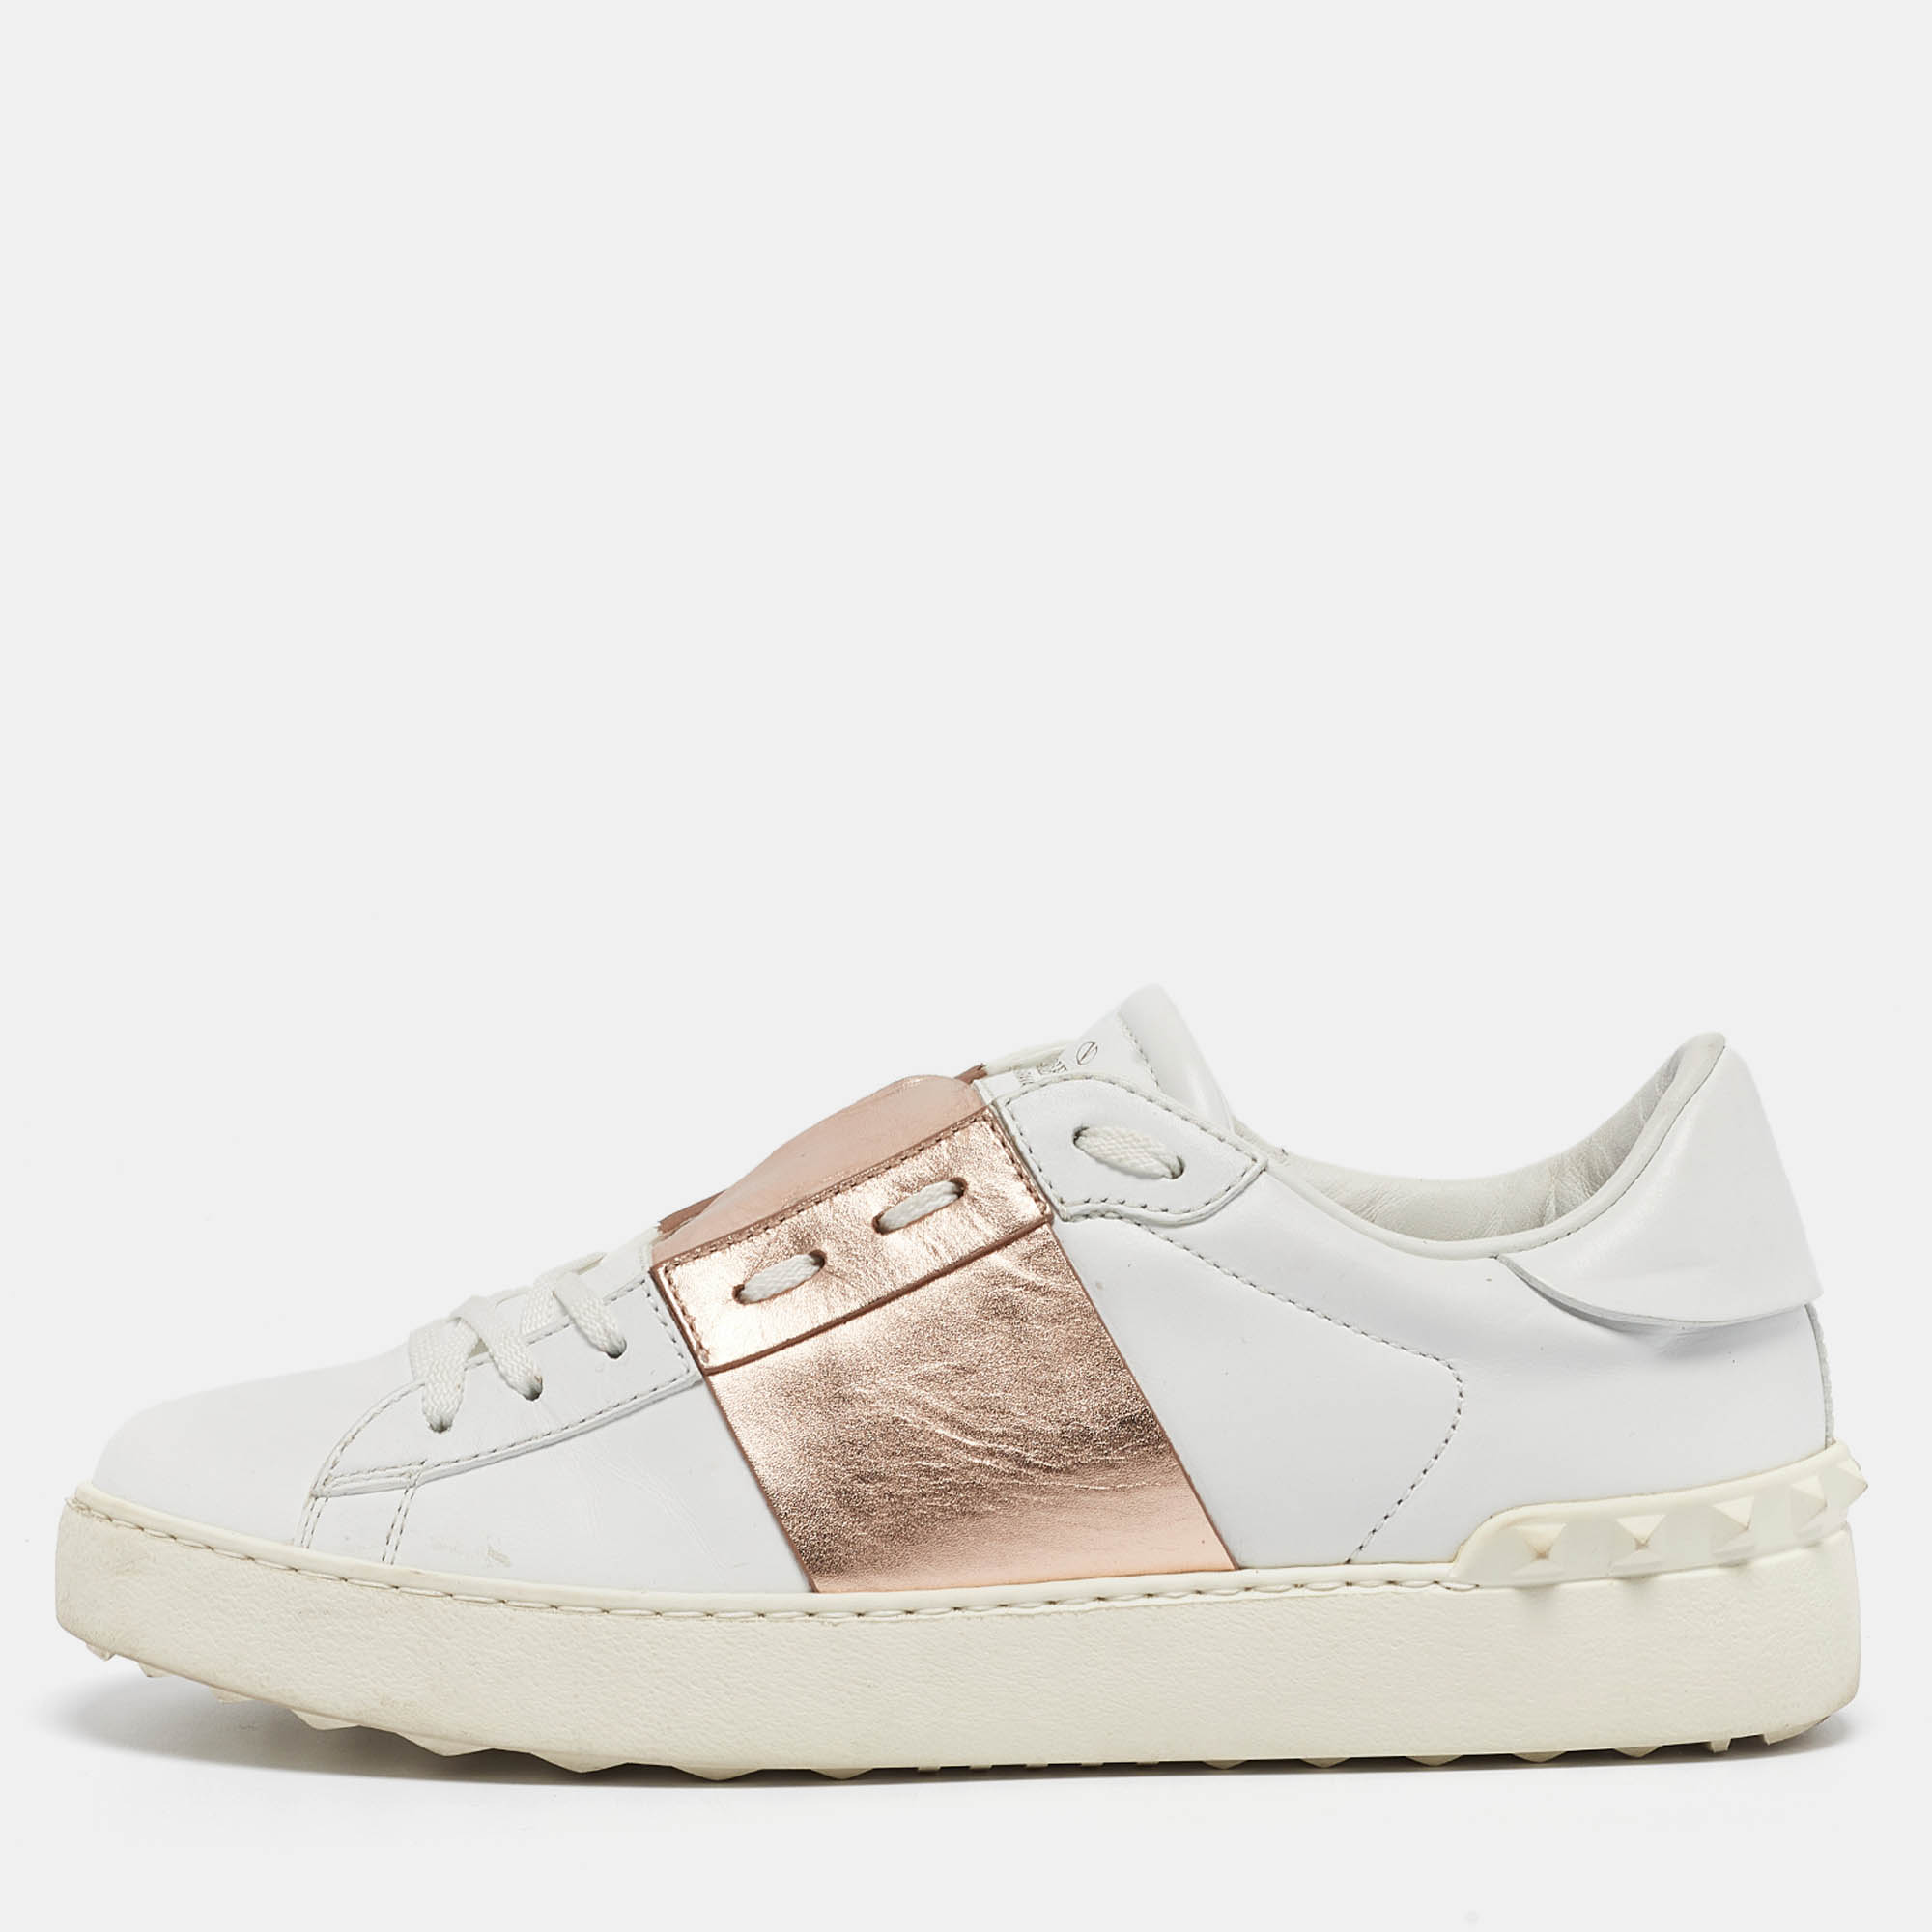 Valentino white/pink leather rockstud lace up sneakers size 40